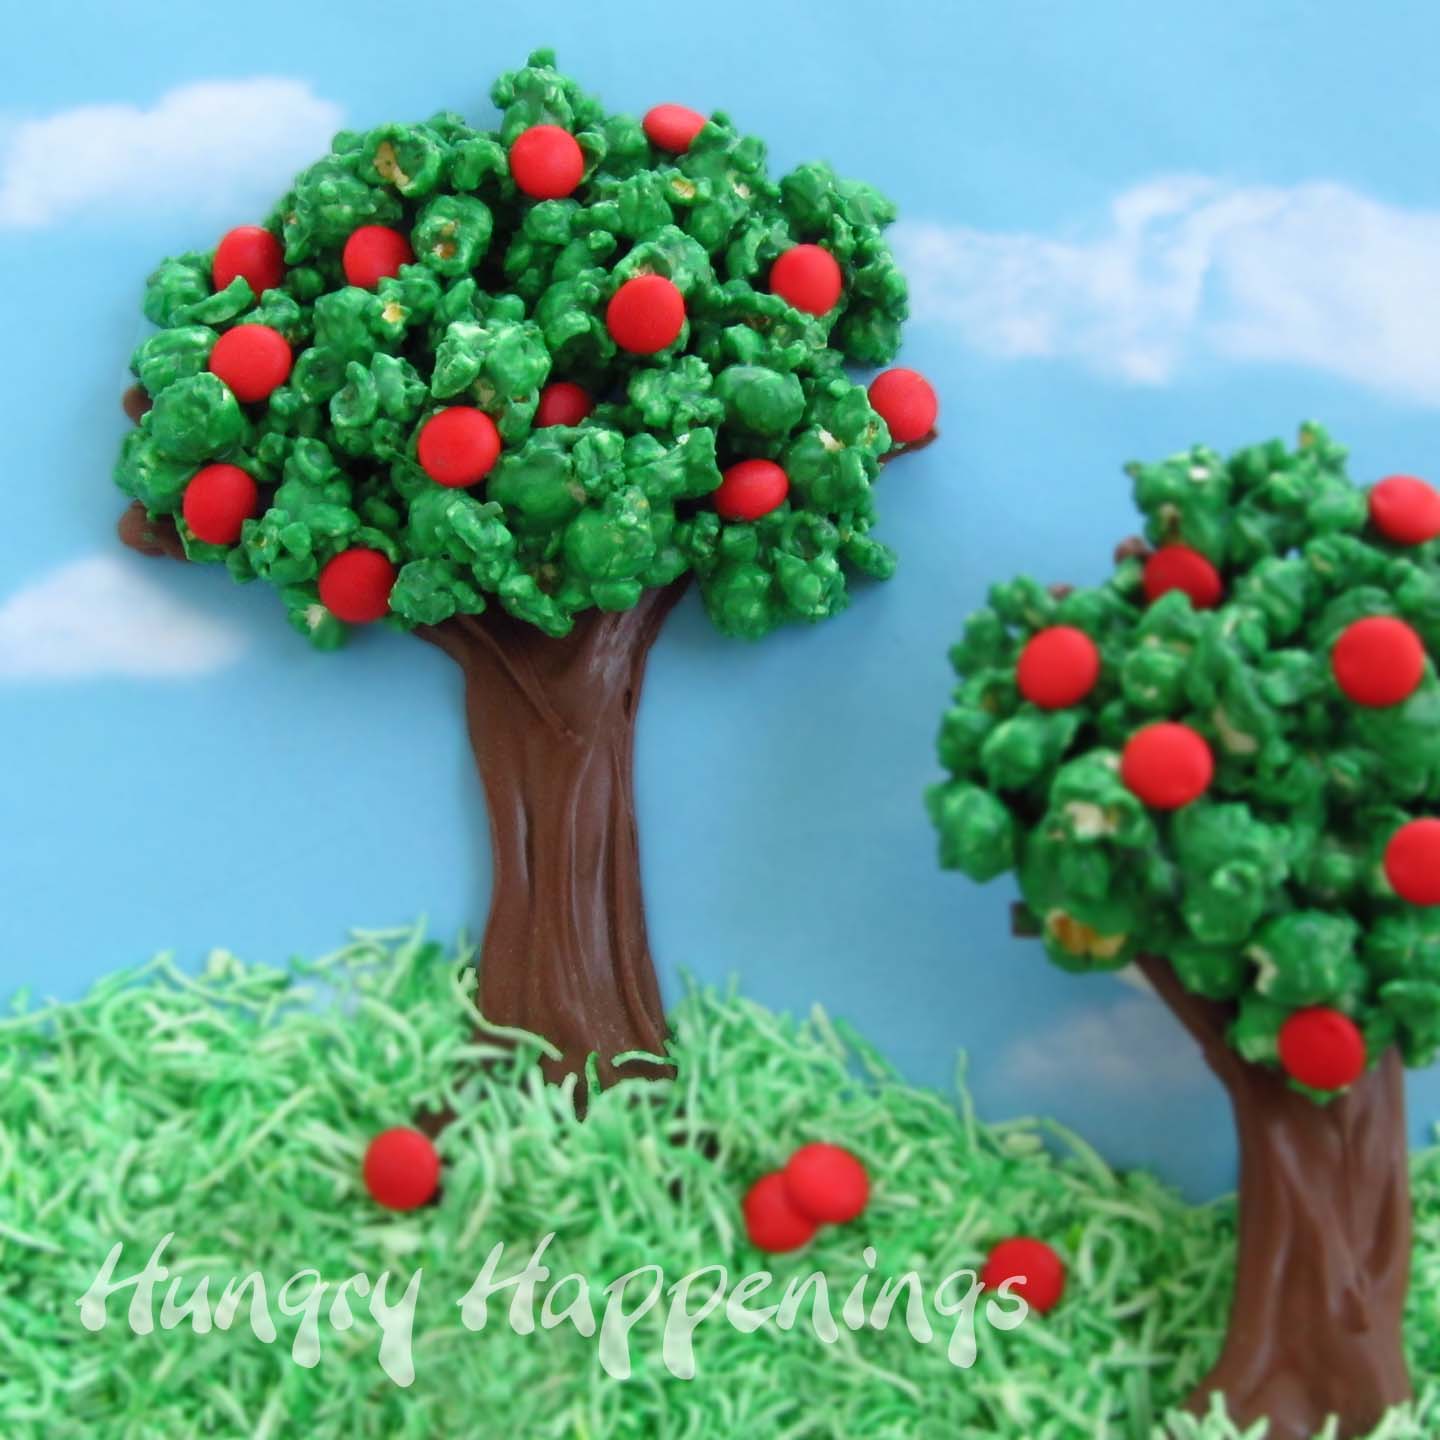 Preschool Crafts for Kids*: Earth Day Candy Popcorn Tree 